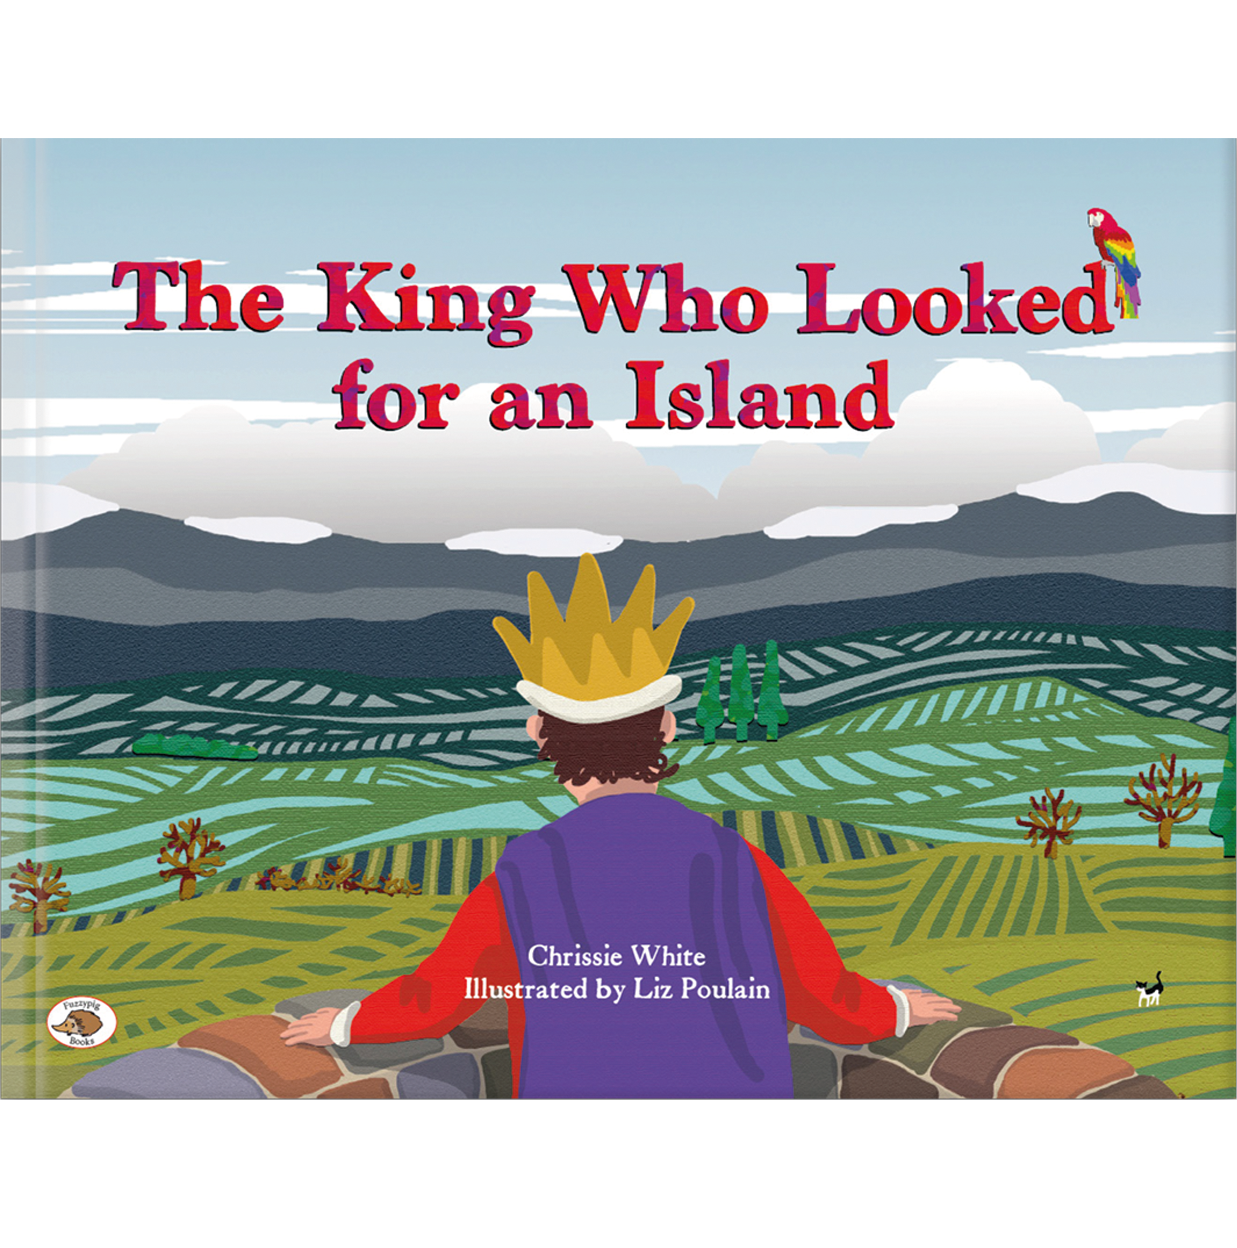 The King Who Looked for an Island